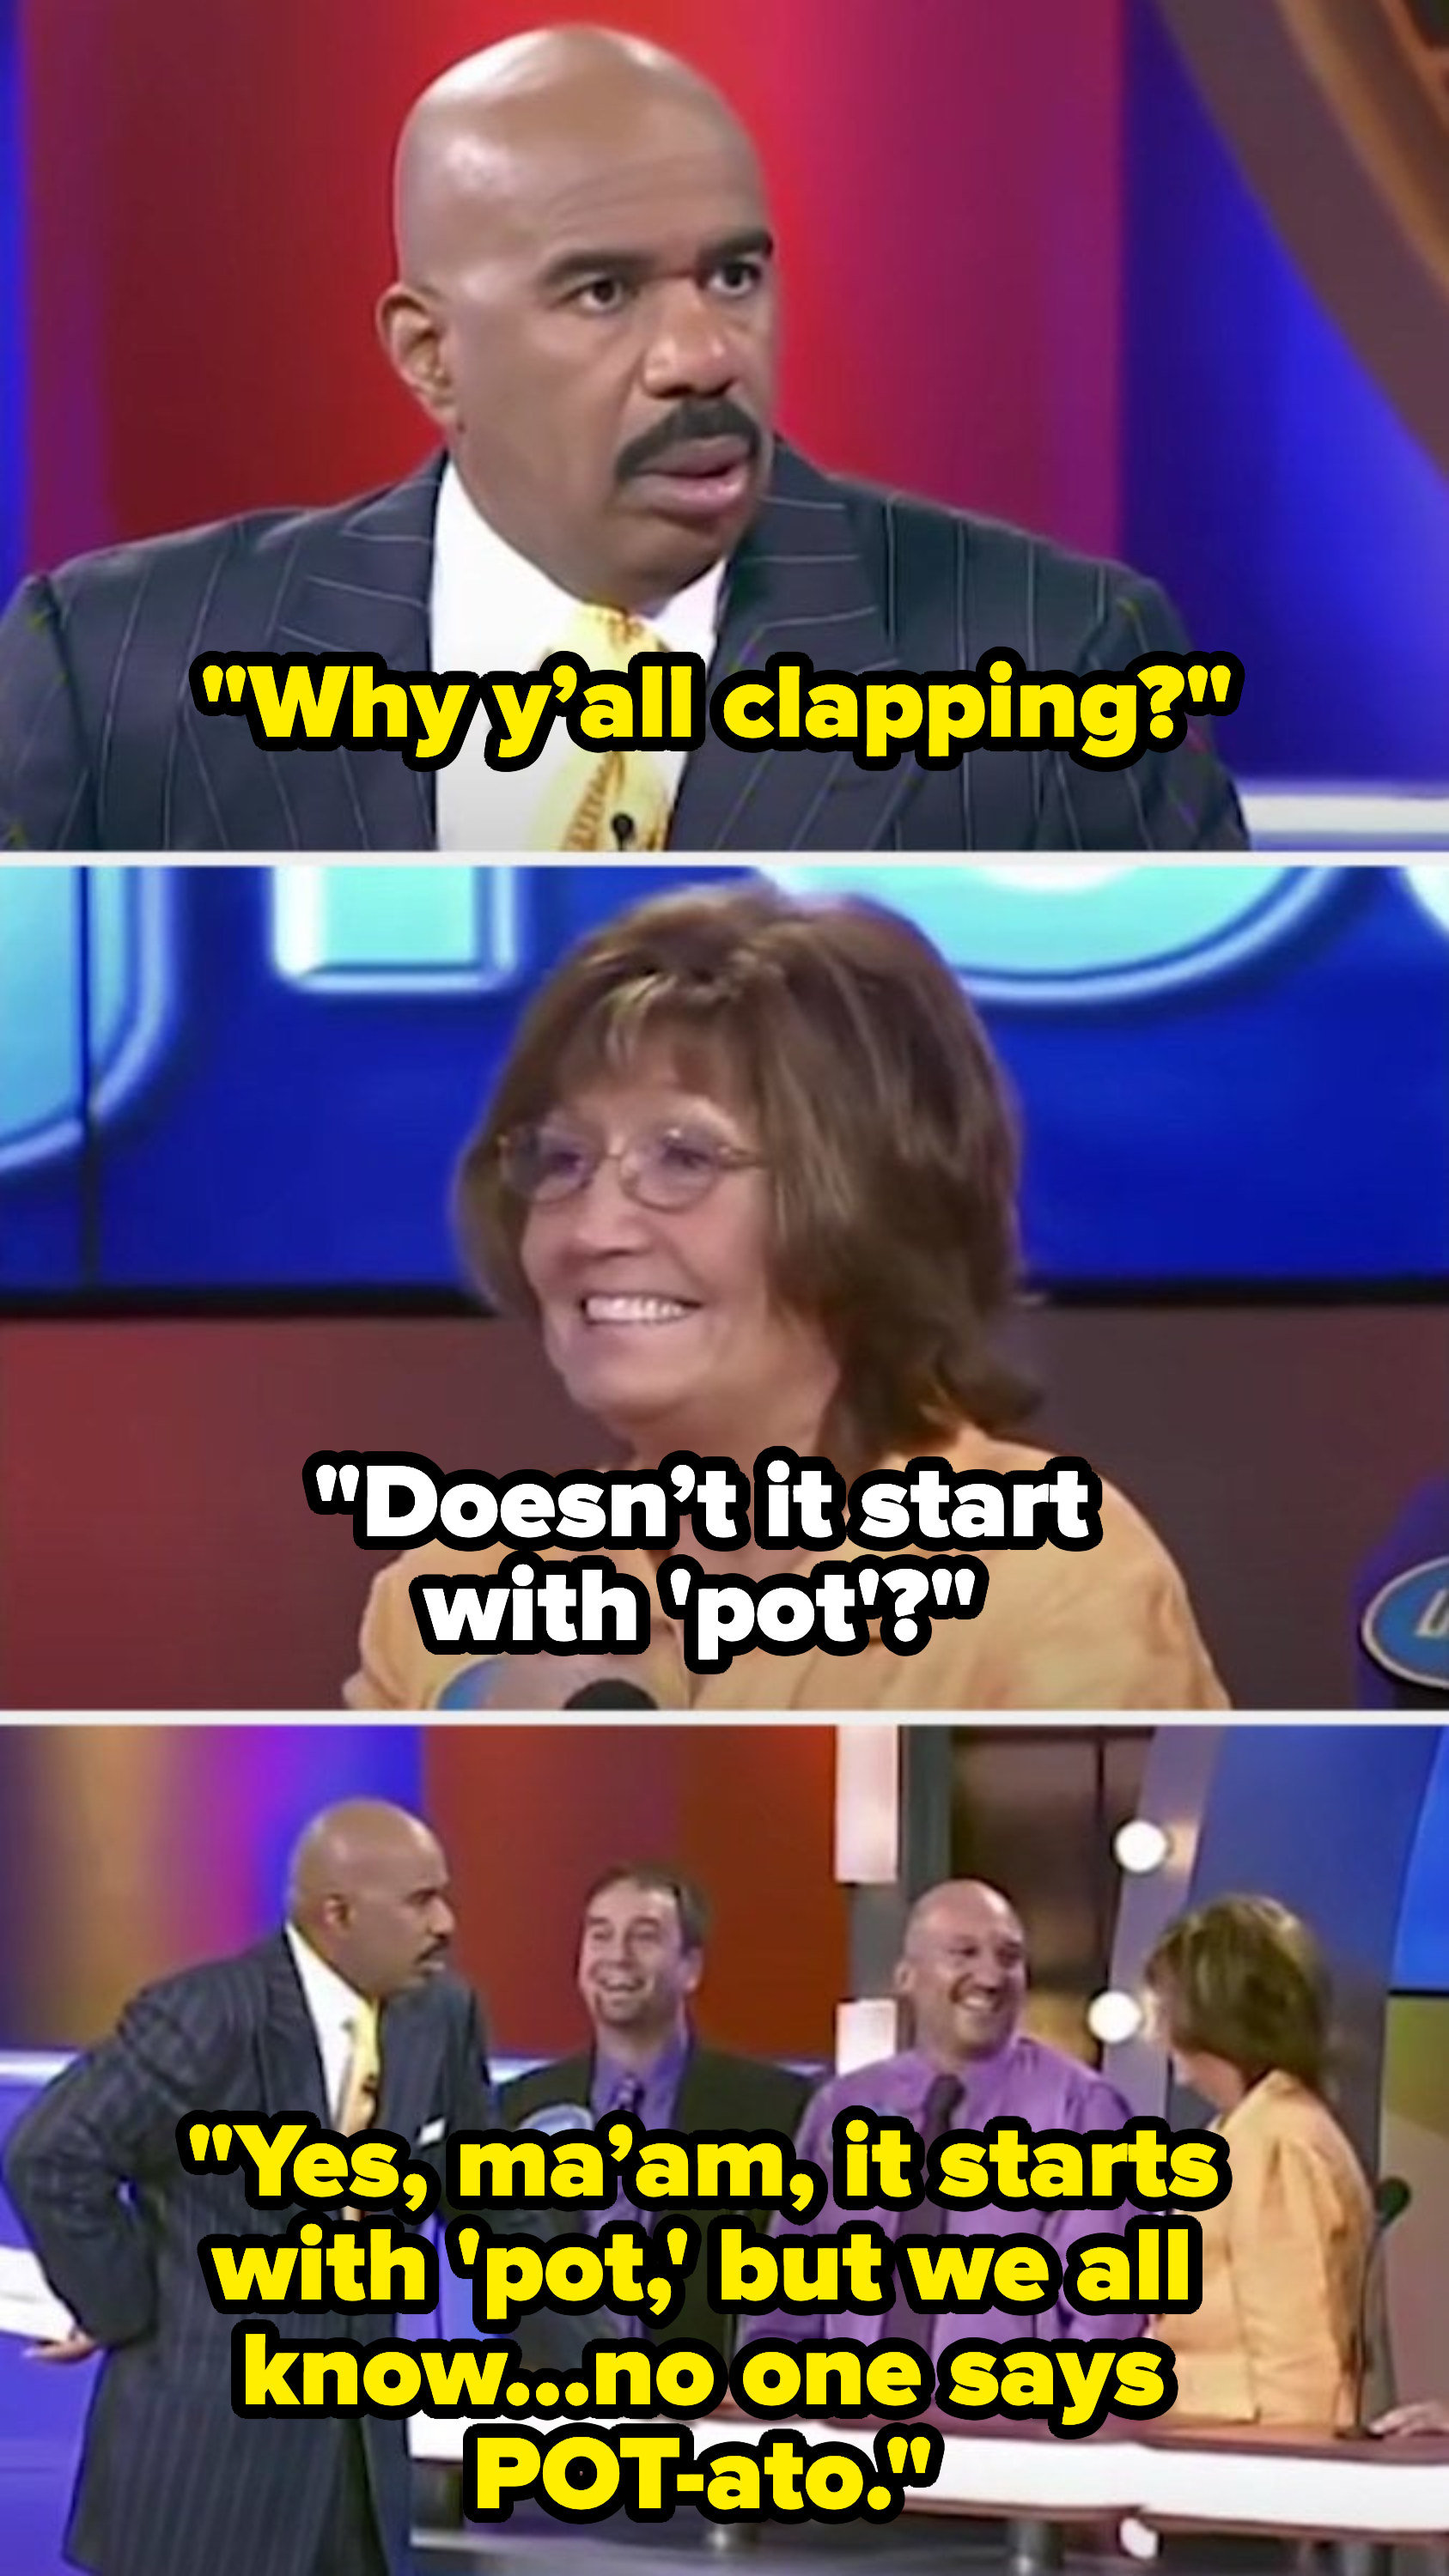 Steve then asks, &quot;Why y&#x27;all clapping?&quot; and the contestant says, &quot;Doesn&#x27;t it start with &#x27;pot?&#x27;&quot; to which Steve replies, &quot;Yes, ma’am, it starts with ‘pot,’ but we all know…no one says POT-ato&quot;